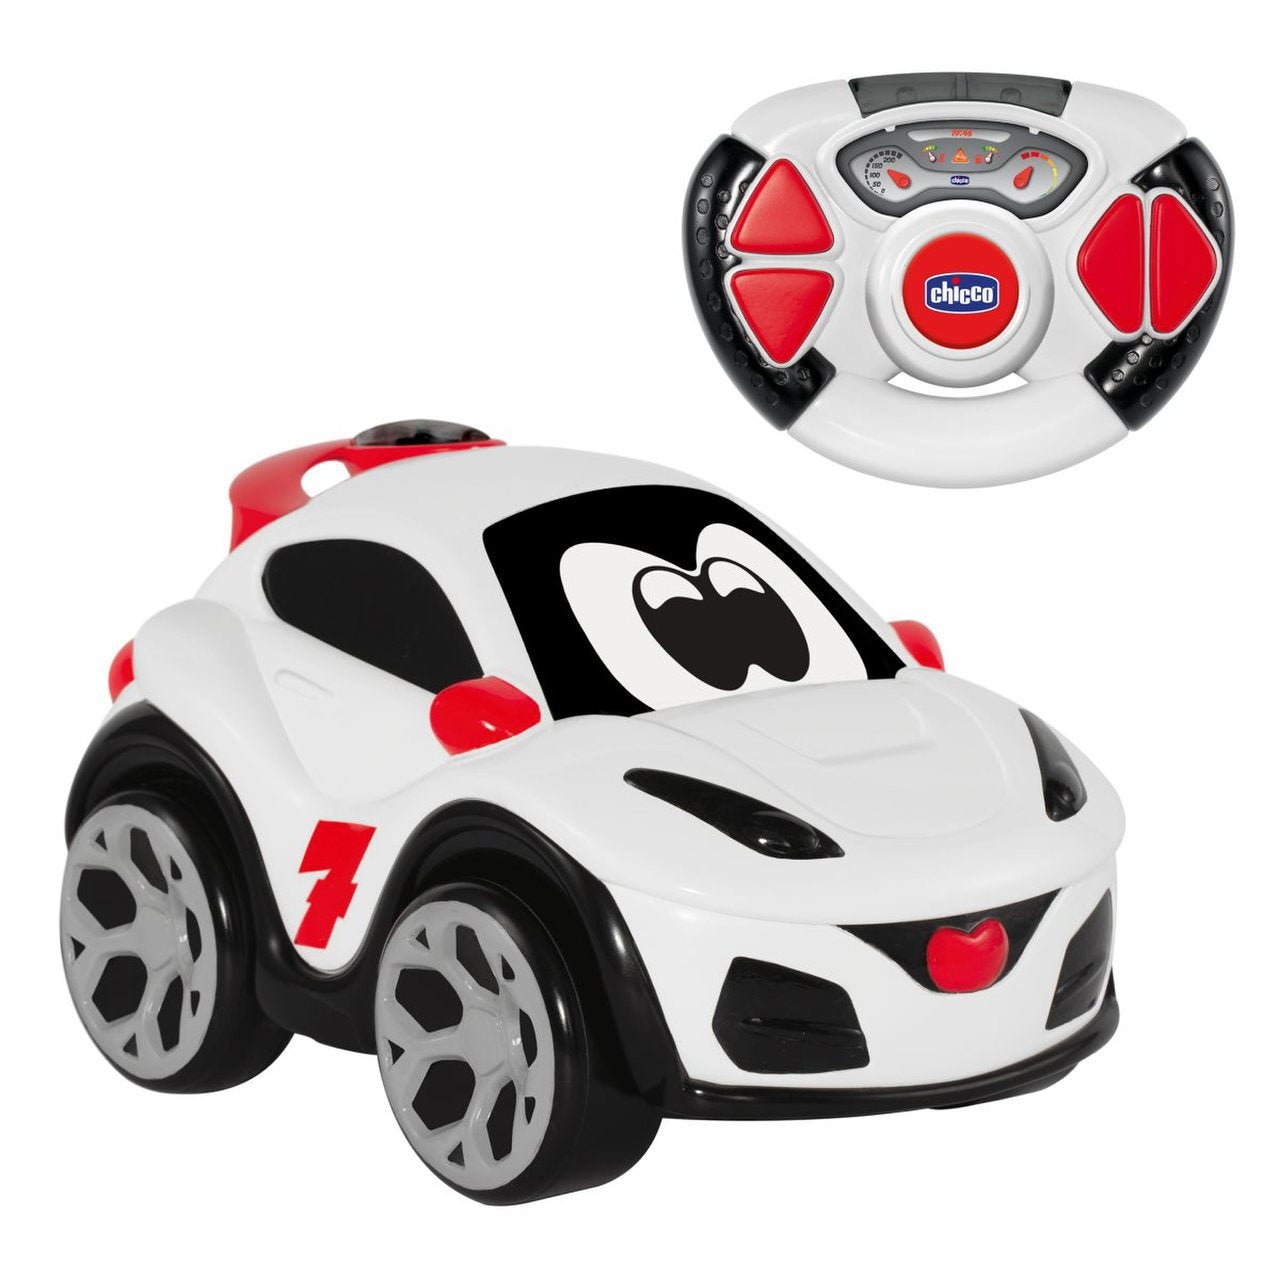 Chicco Toy Rocket The Crossover Rc